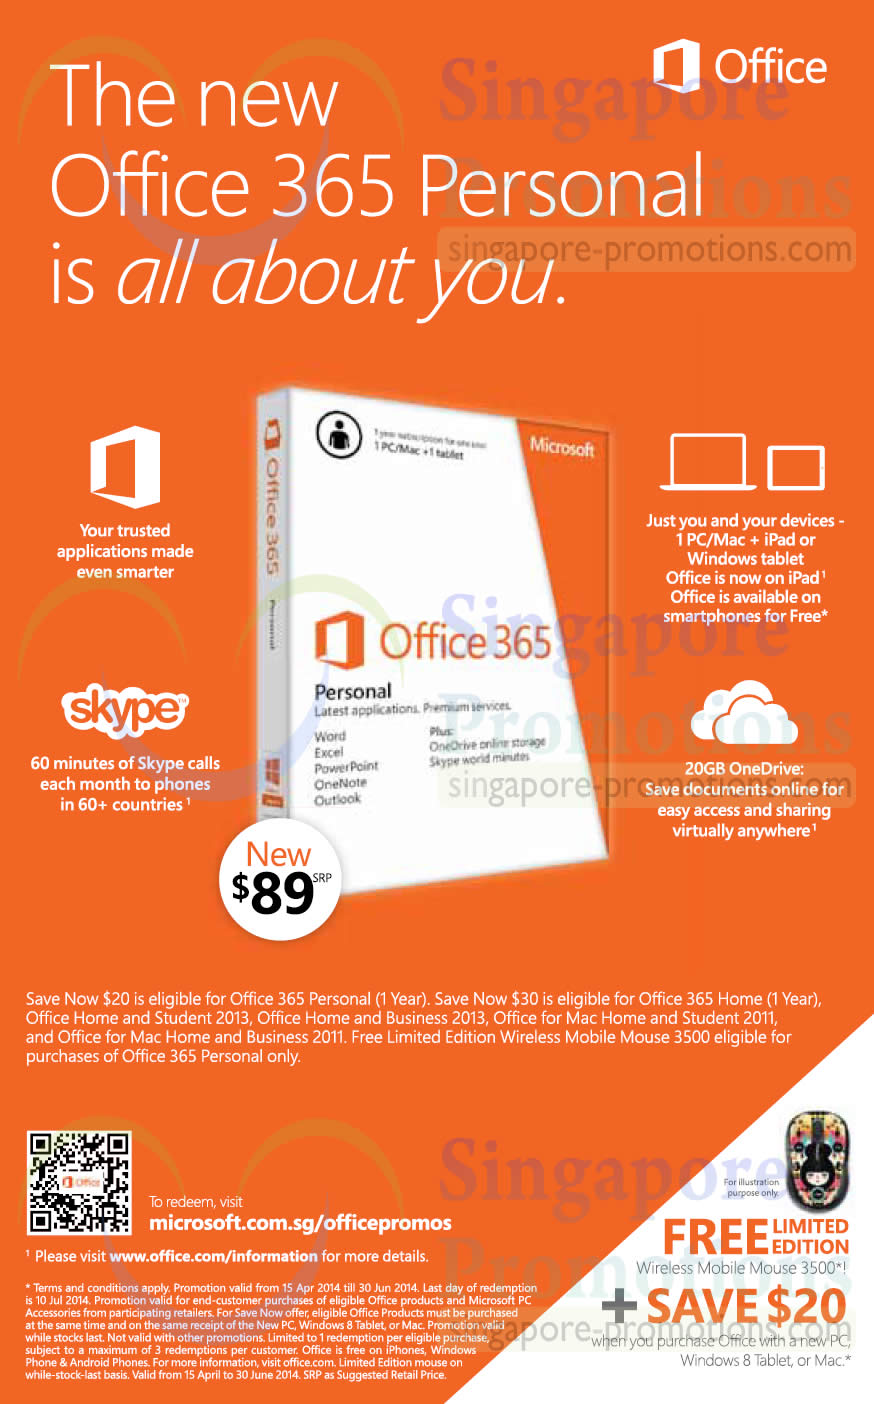 Microsoft Office 365 Discounts Free Gifts More 1 Apr 30 Jun 2014